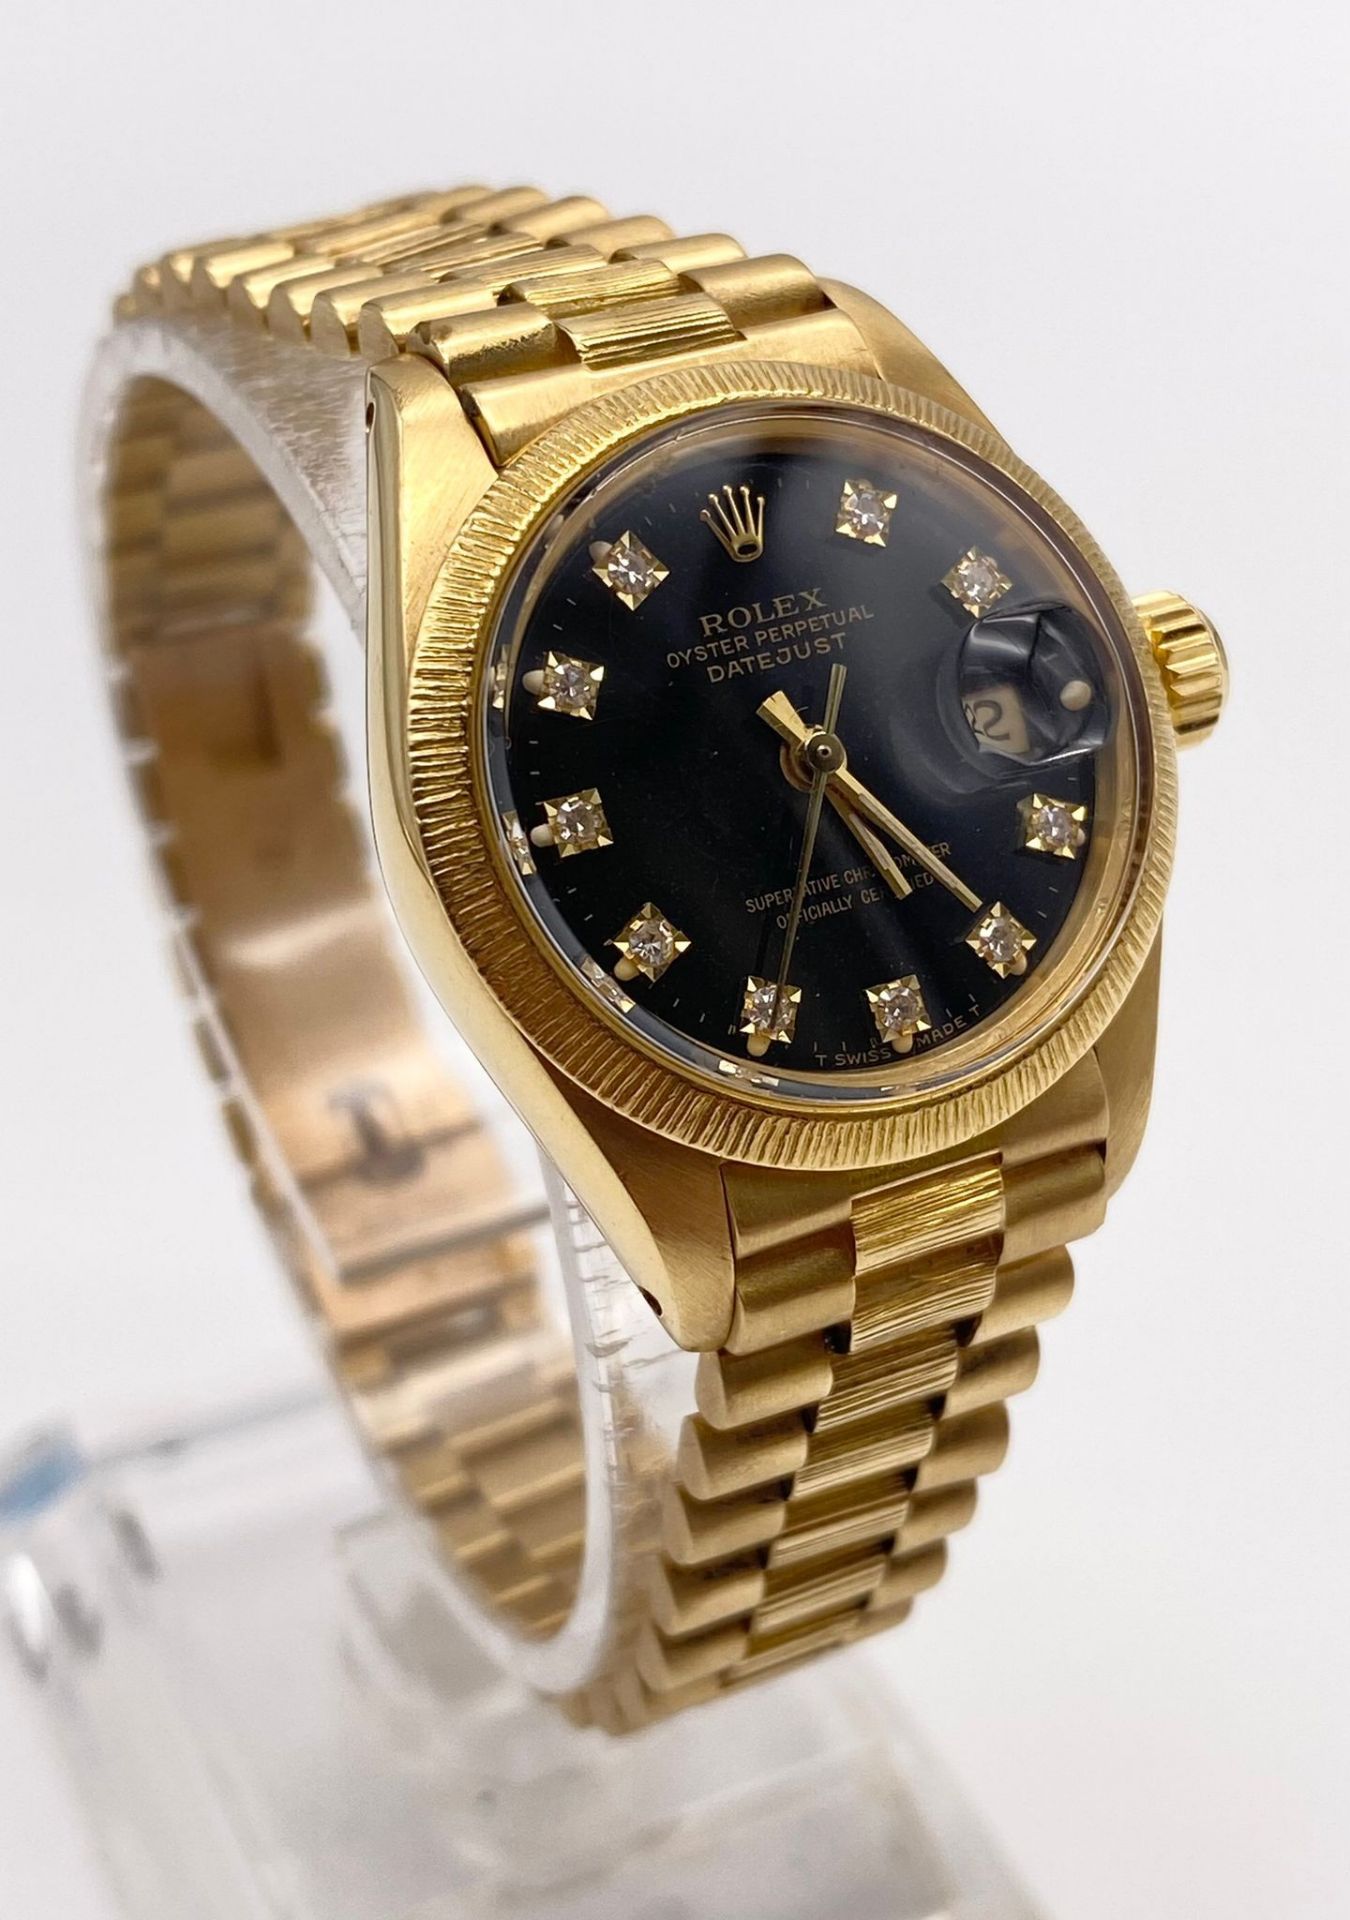 A 1980s Rolex Oyster Perpetual 18K Solid Gold and Diamond Datejust Ladies Watch - with Bark-Effect